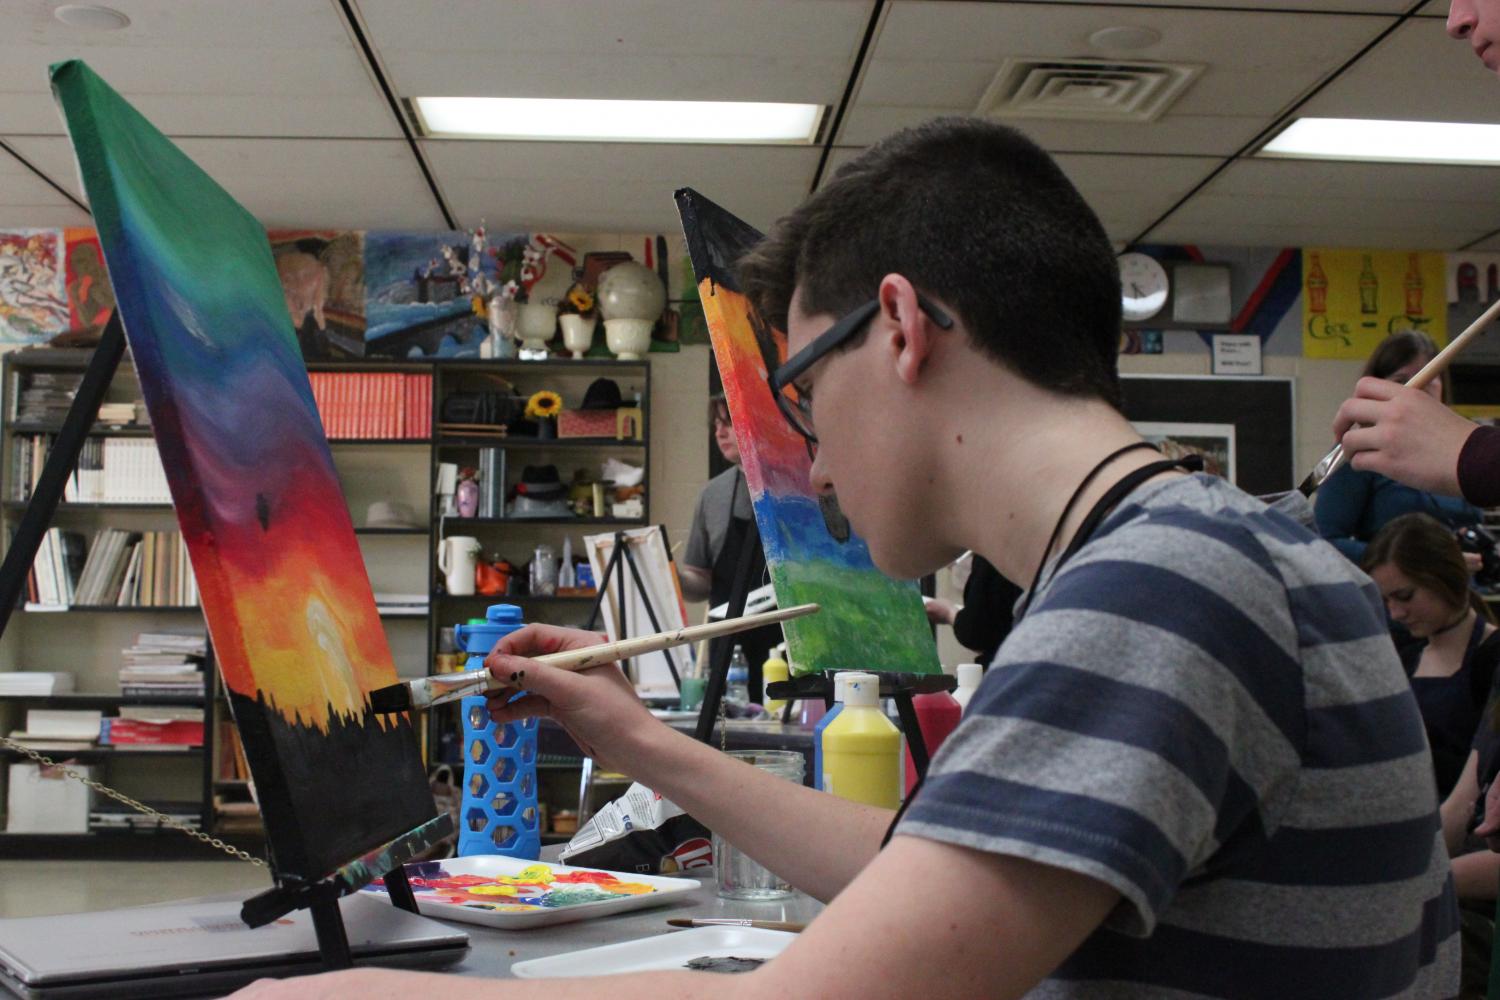 Andrew Carriero begins to paint one of his trees for the background of his painting.